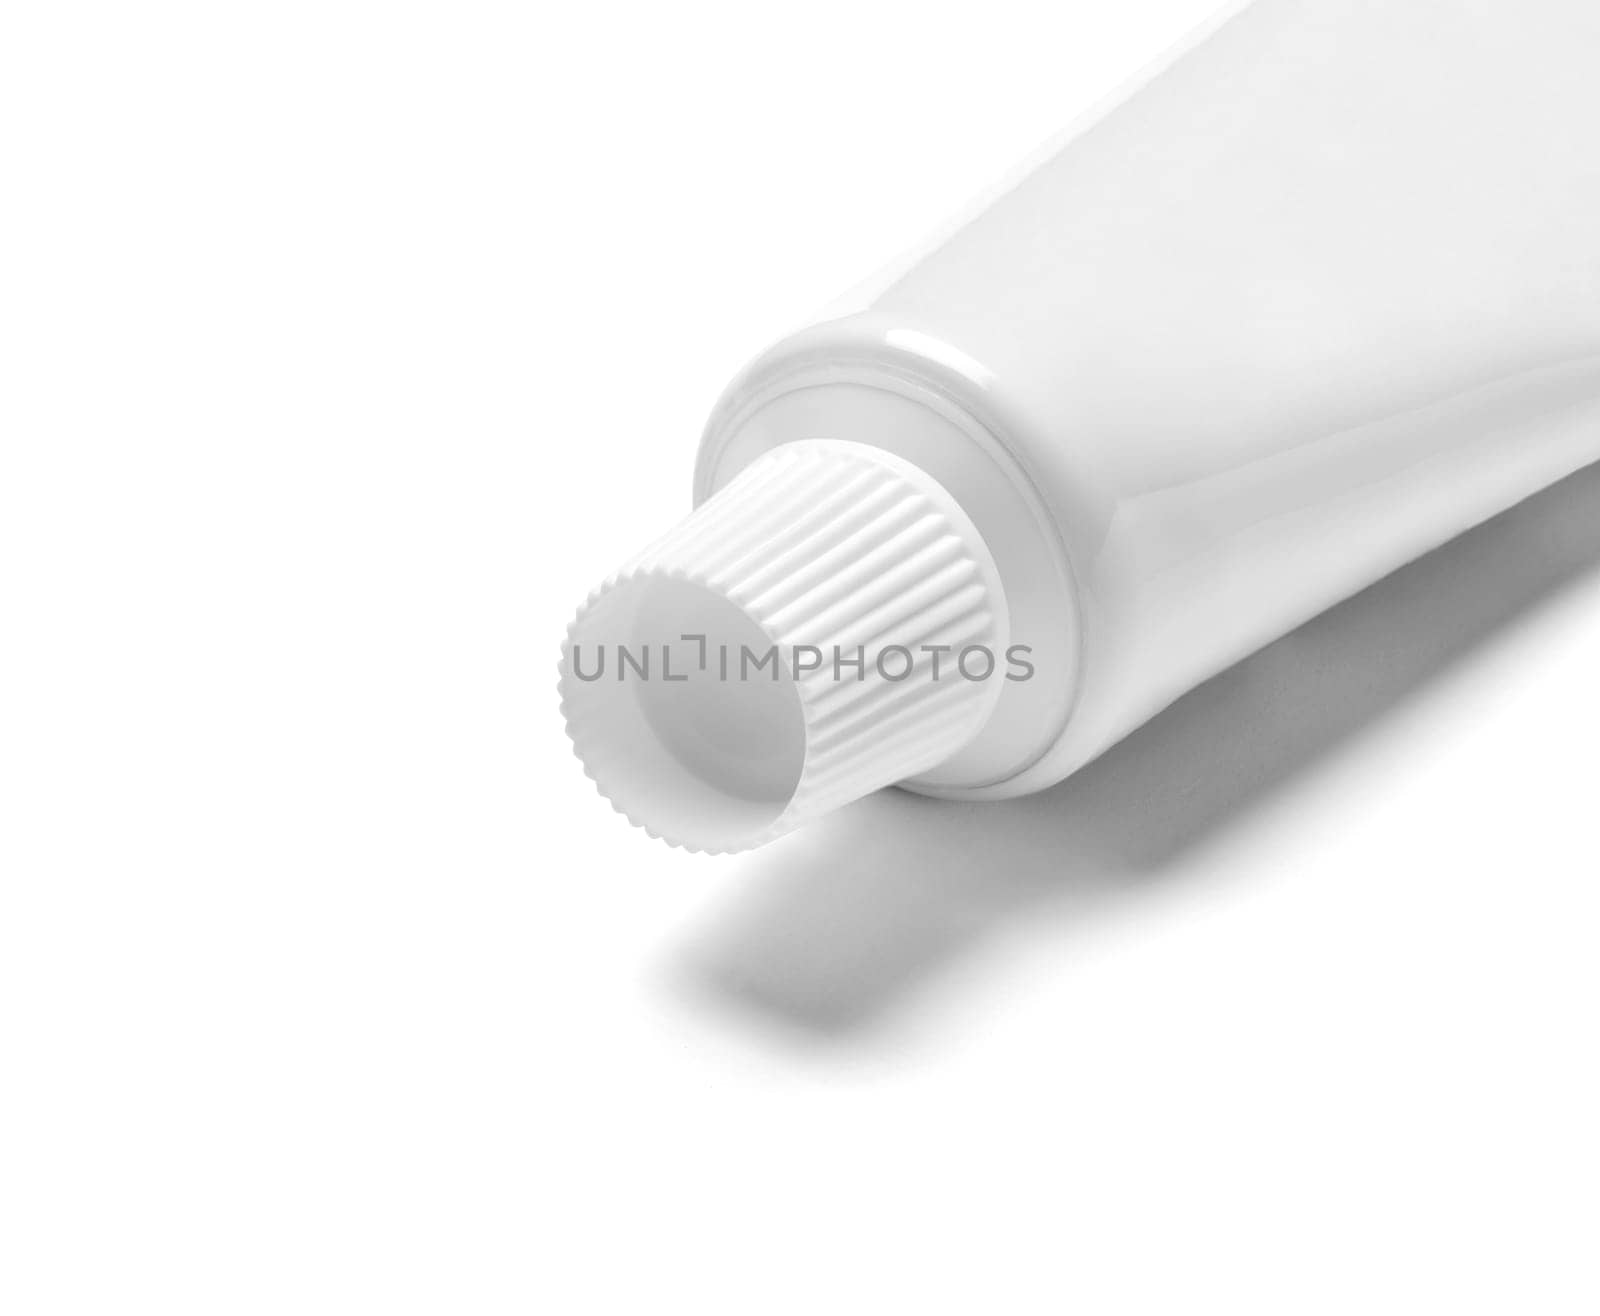 close up of a toothpaste or beauty cream tube on white background